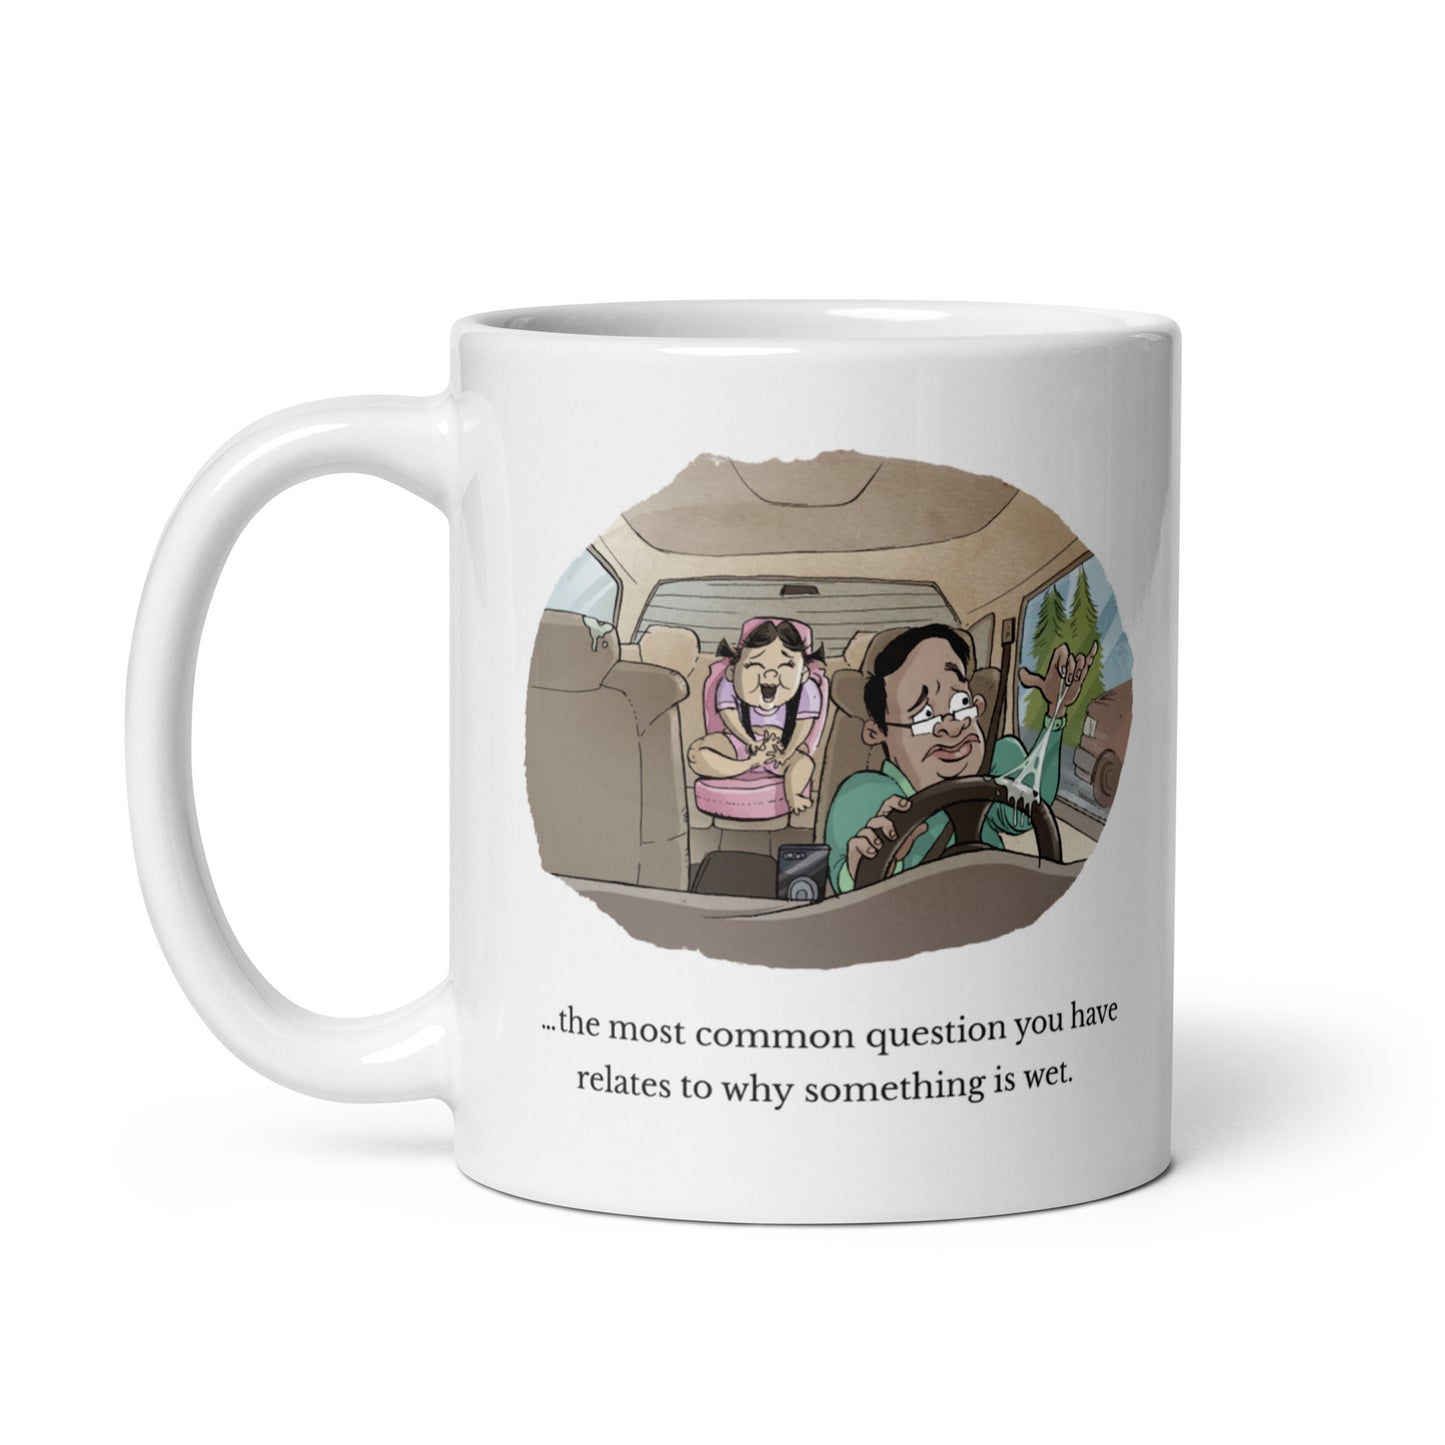 Mug: The most common question you have relates why something is wet.